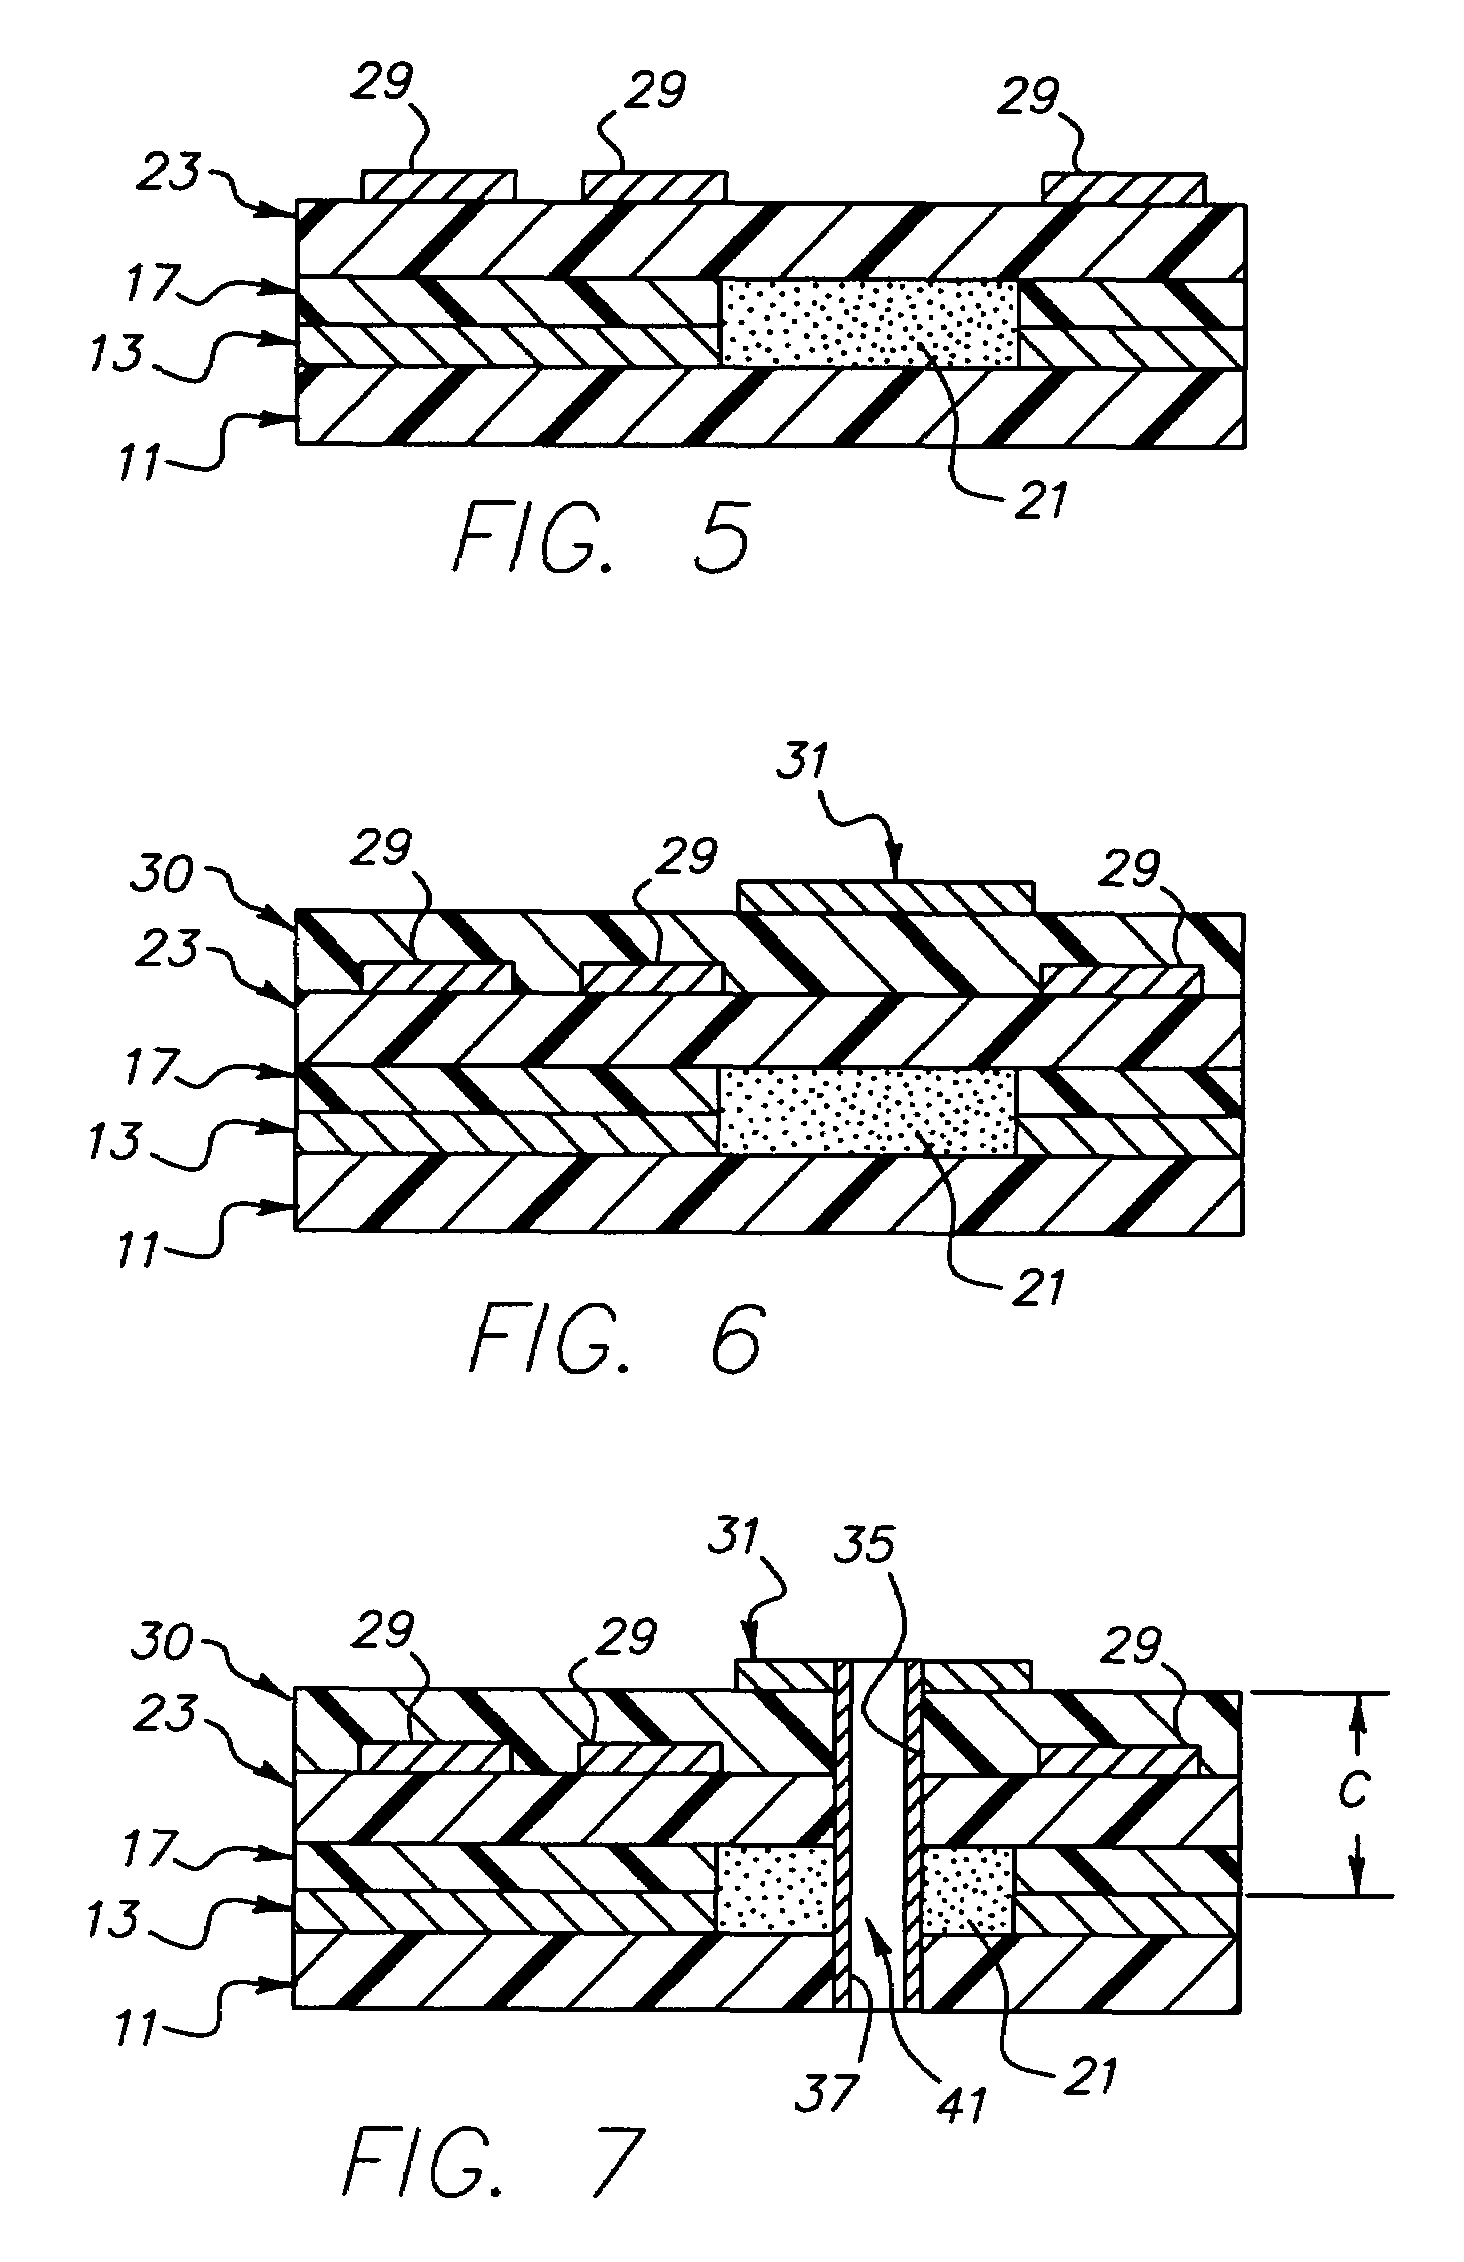 Circuitized substrate with internal resistor, method of making said circuitized substrate, and electrical assembly utilizing said circuitized substrate